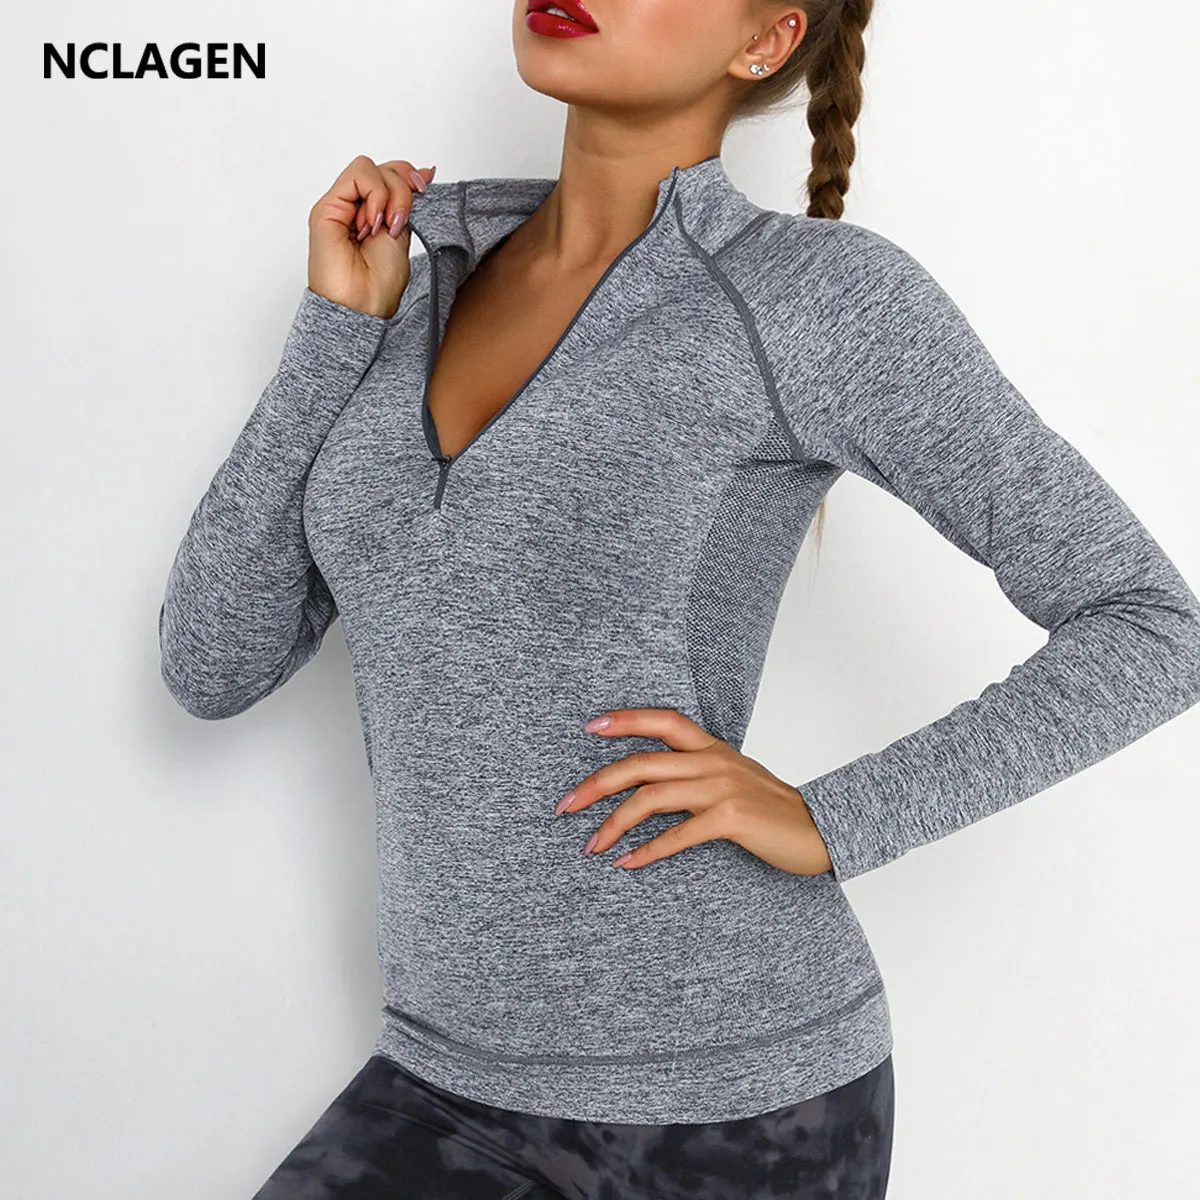 

NCLAGEN Sports Top Women Long Sleeve Zipper Pocket Gym Shirt Fitness Sweater Workout Athletic Active Quick Drying Yoga Blouse